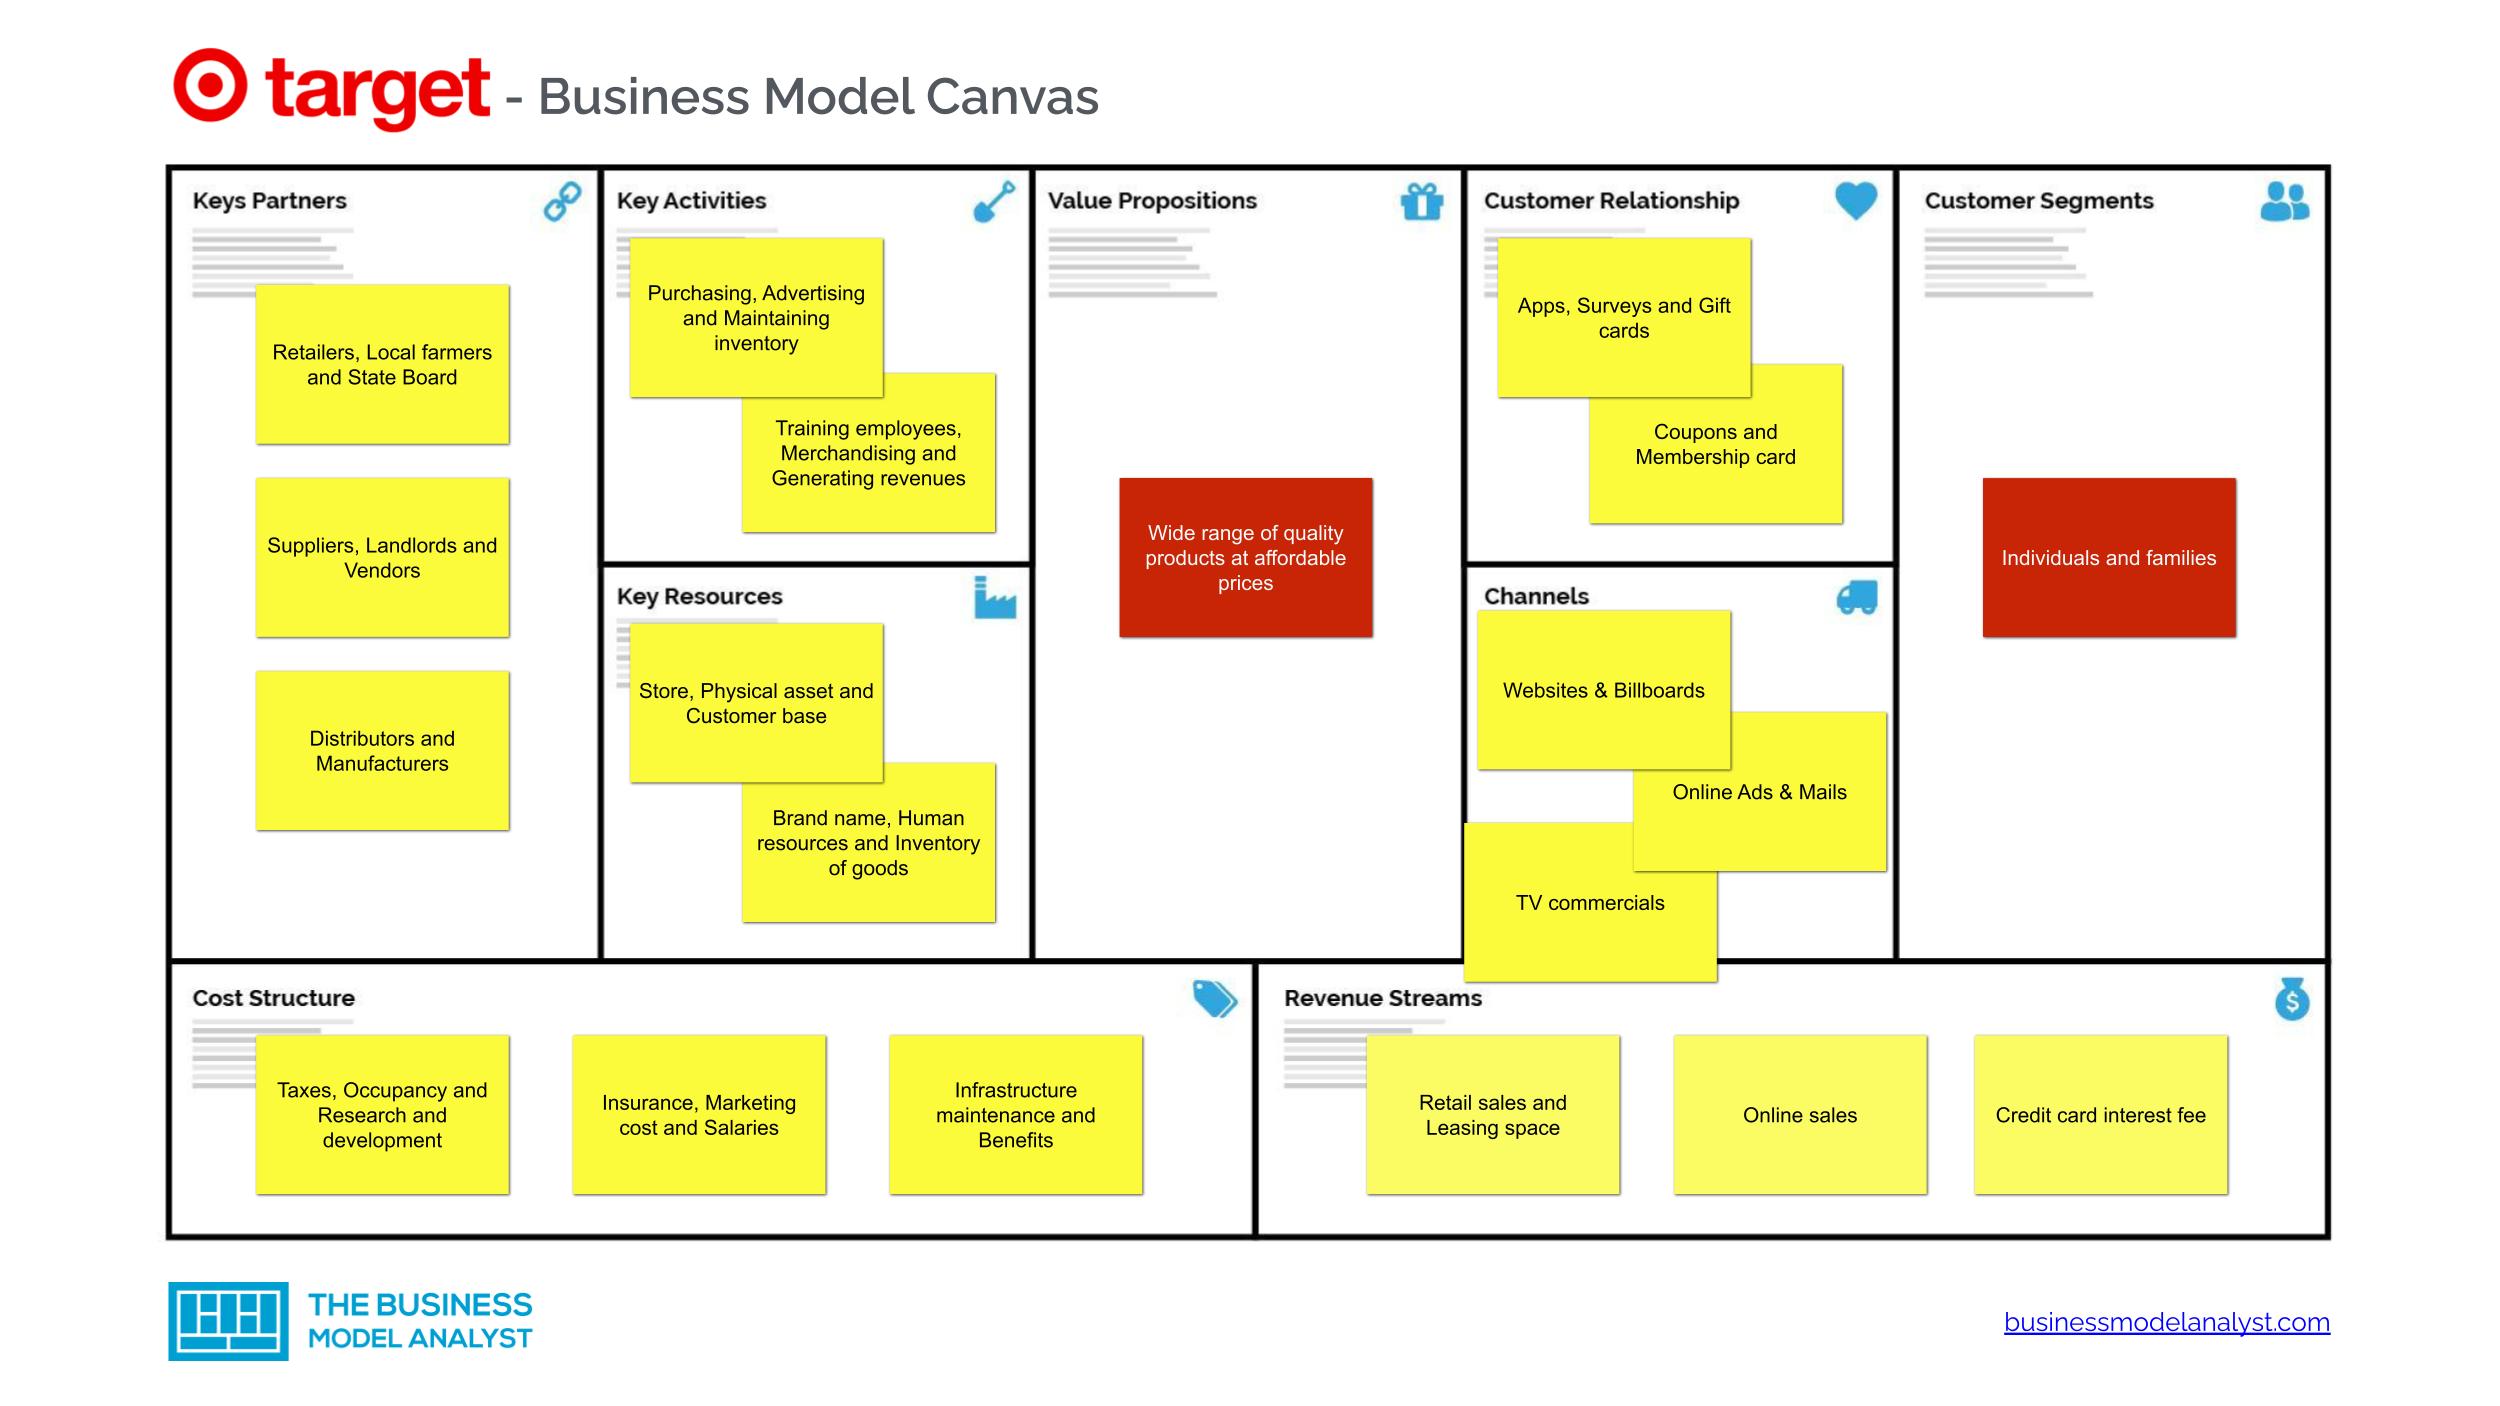 Best Insights into Shipt Business Model and Revenue Model